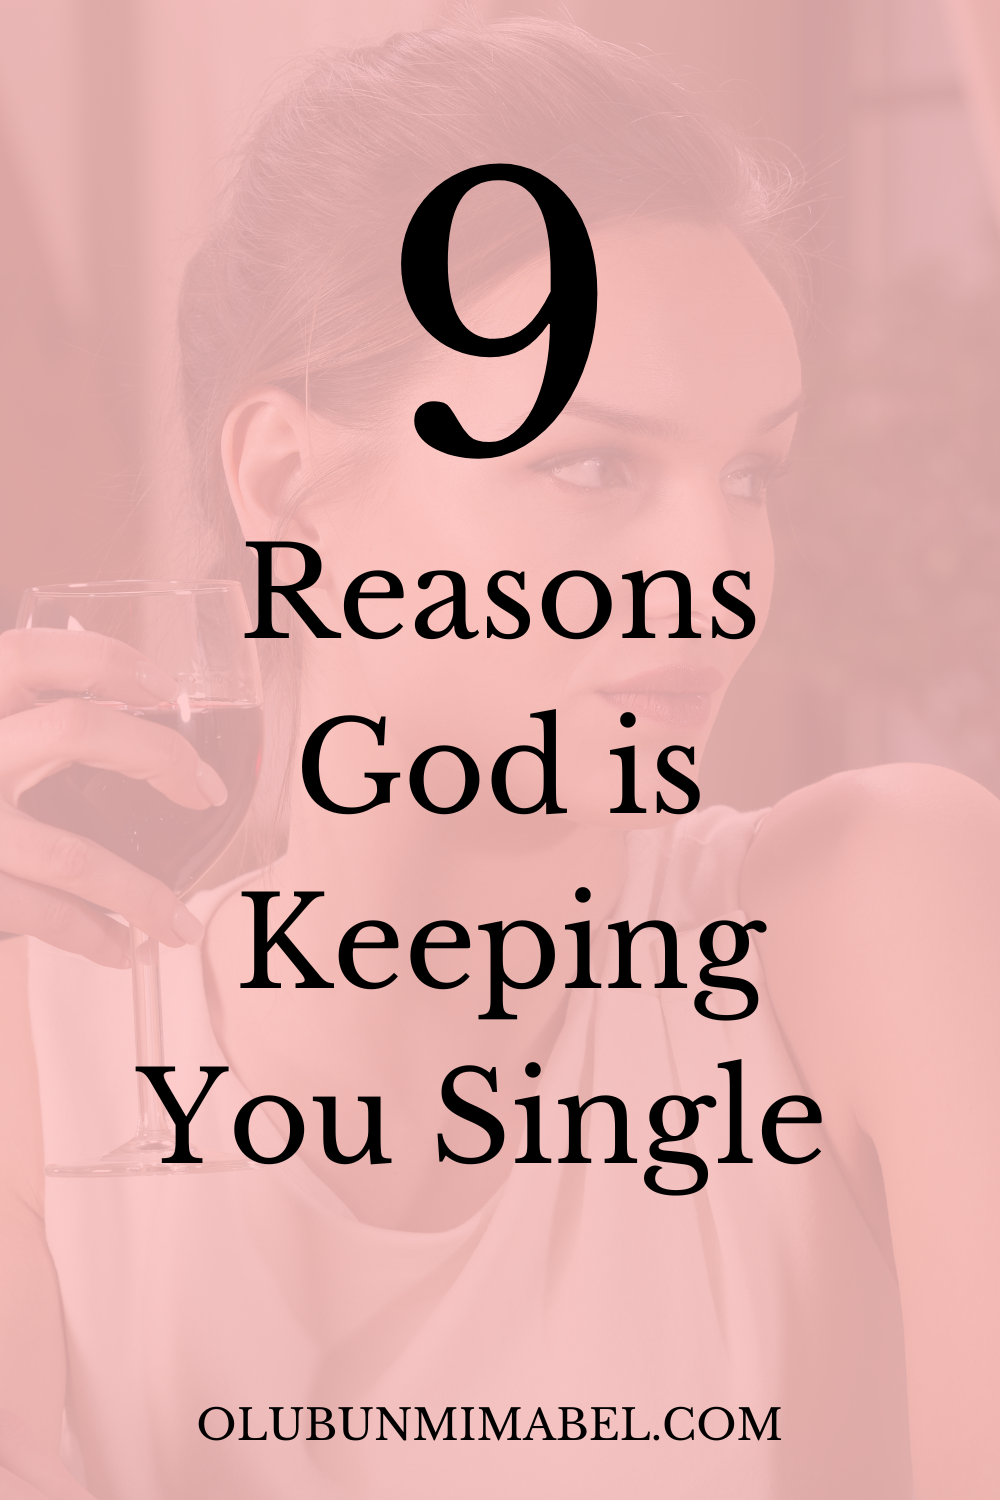 Why is God Keeping Me Single?